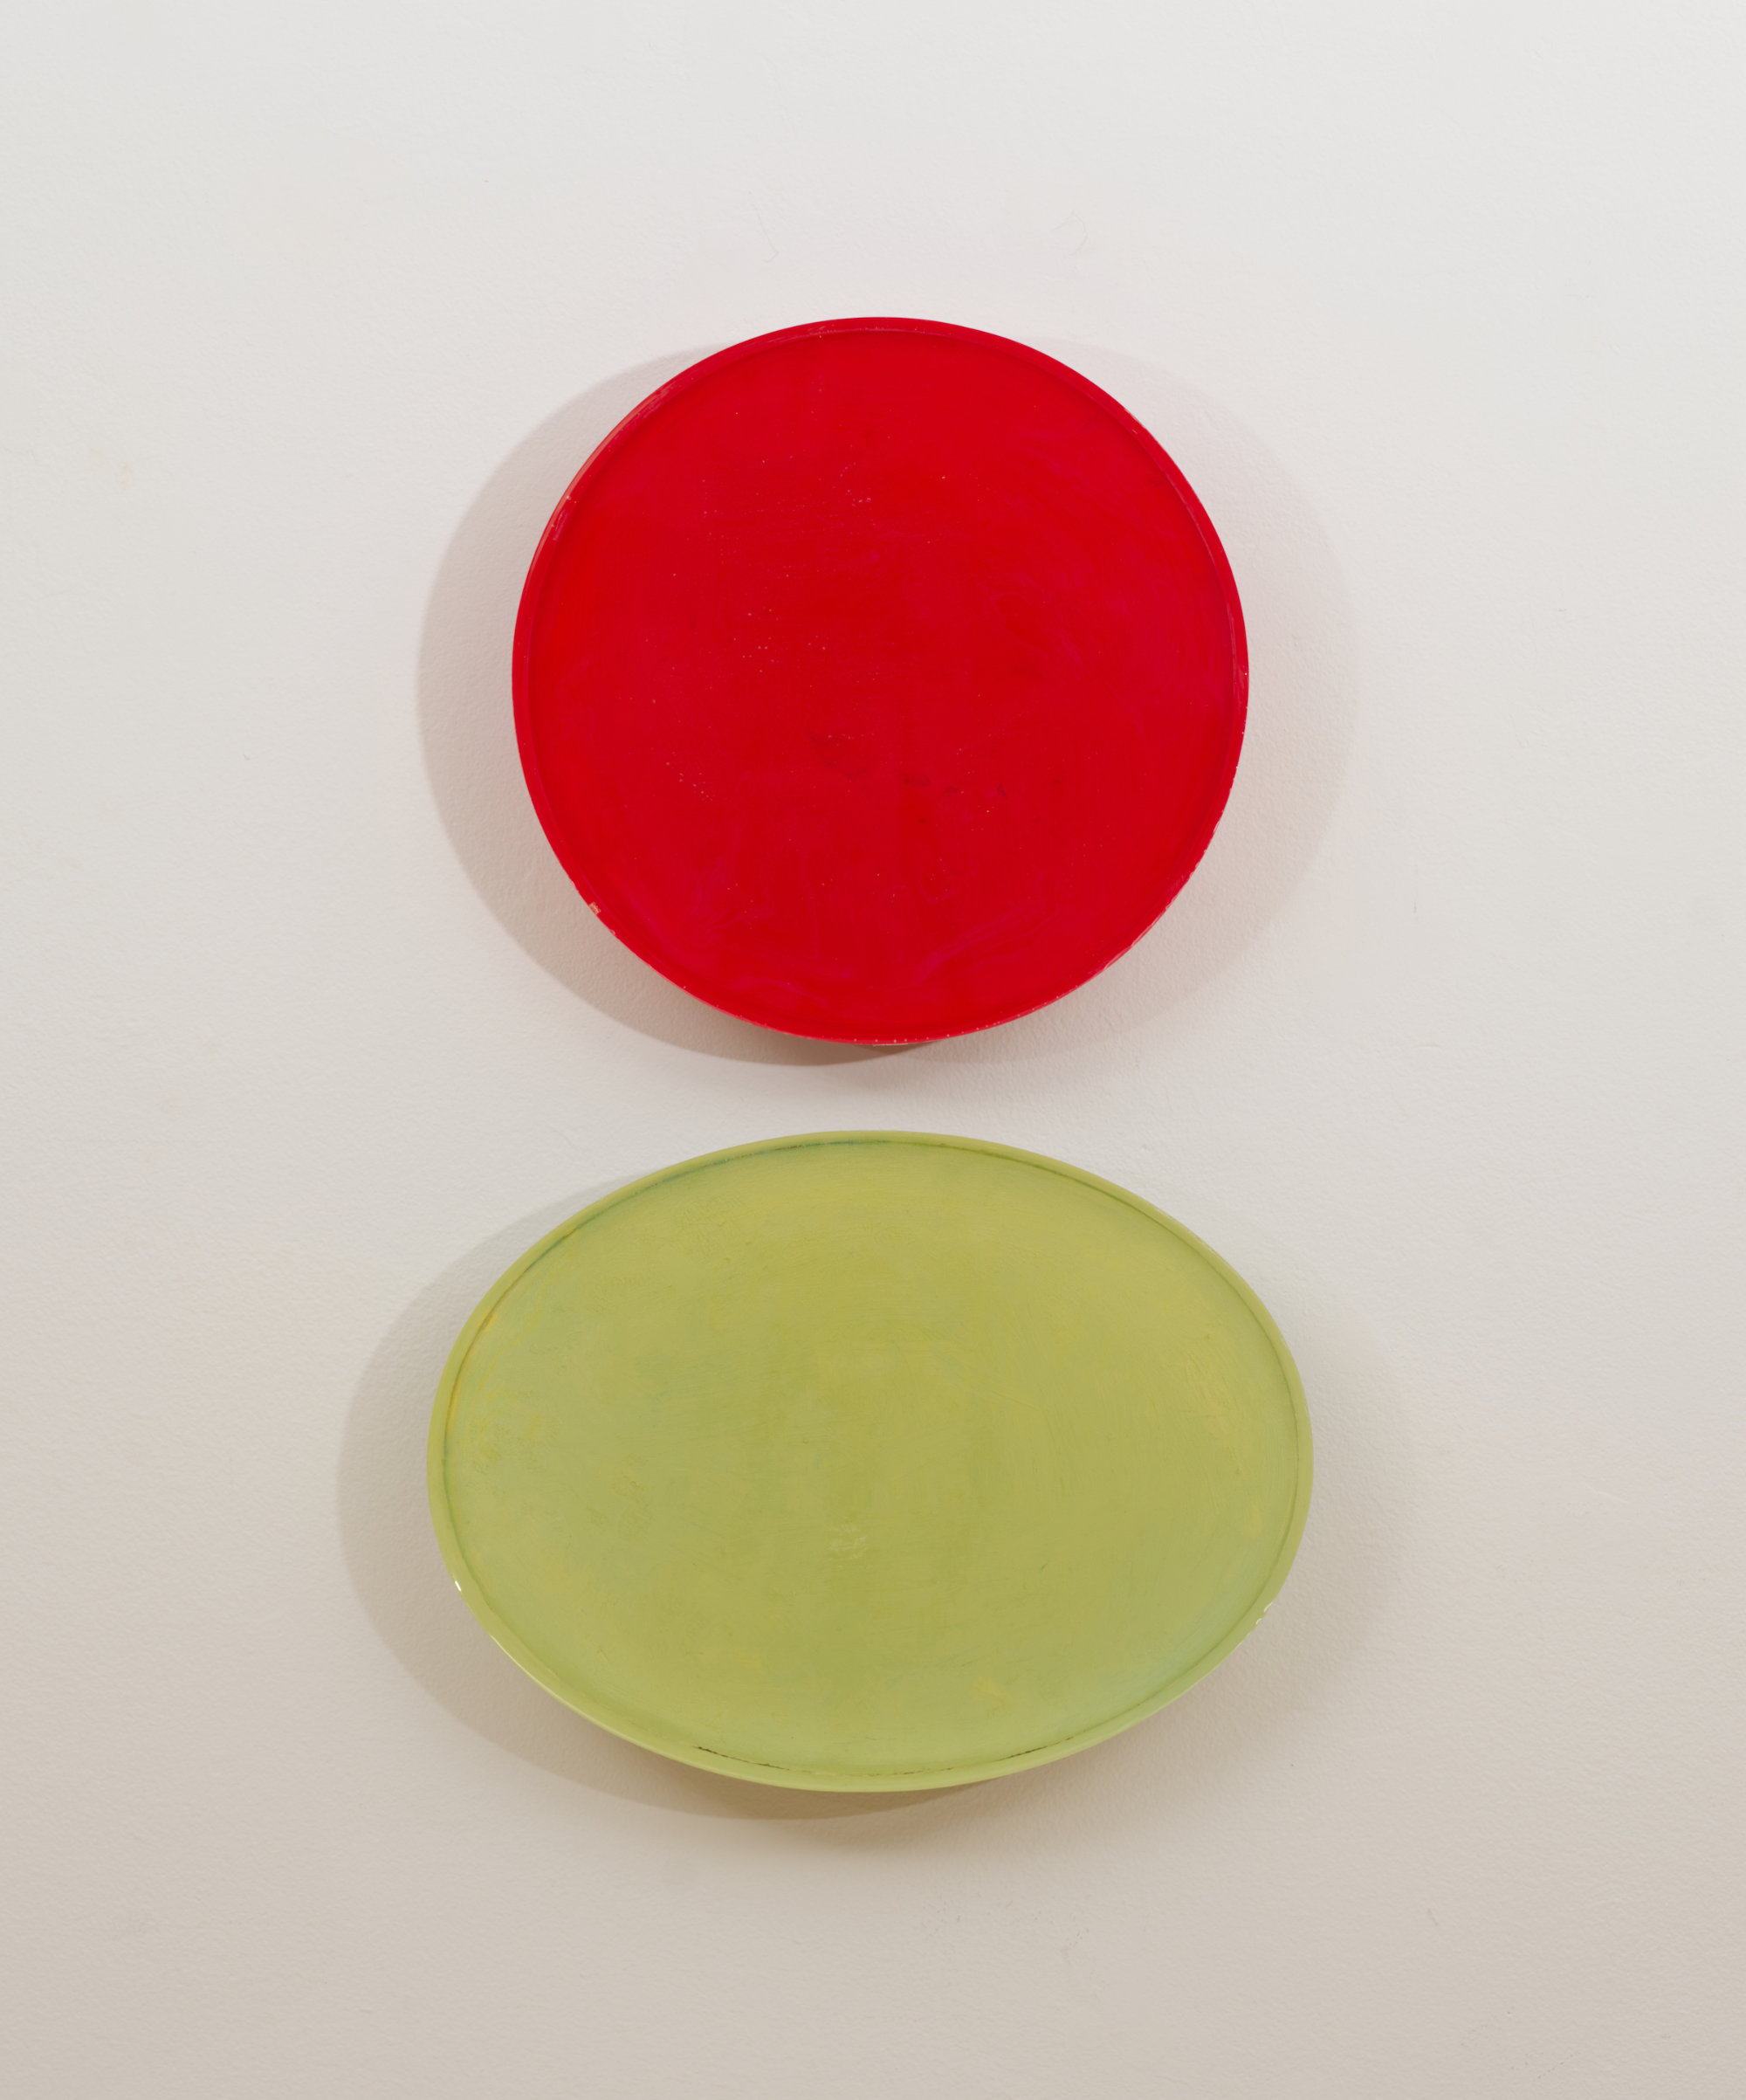 Resin Work titled "Red and Green" By Ana Rendich for sale by Les Yeux du Monde